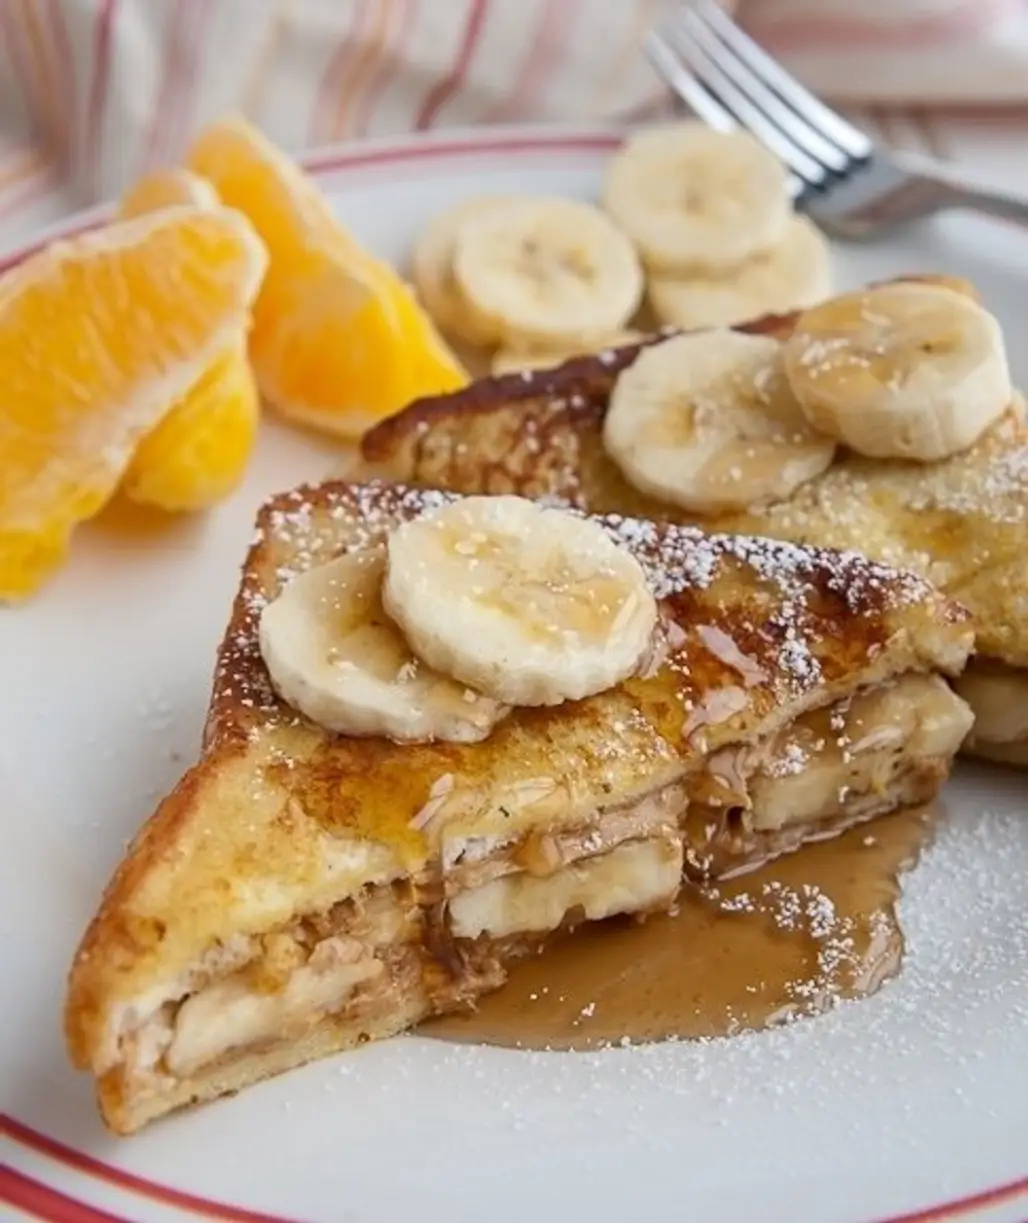 Peanut Butter and Banana